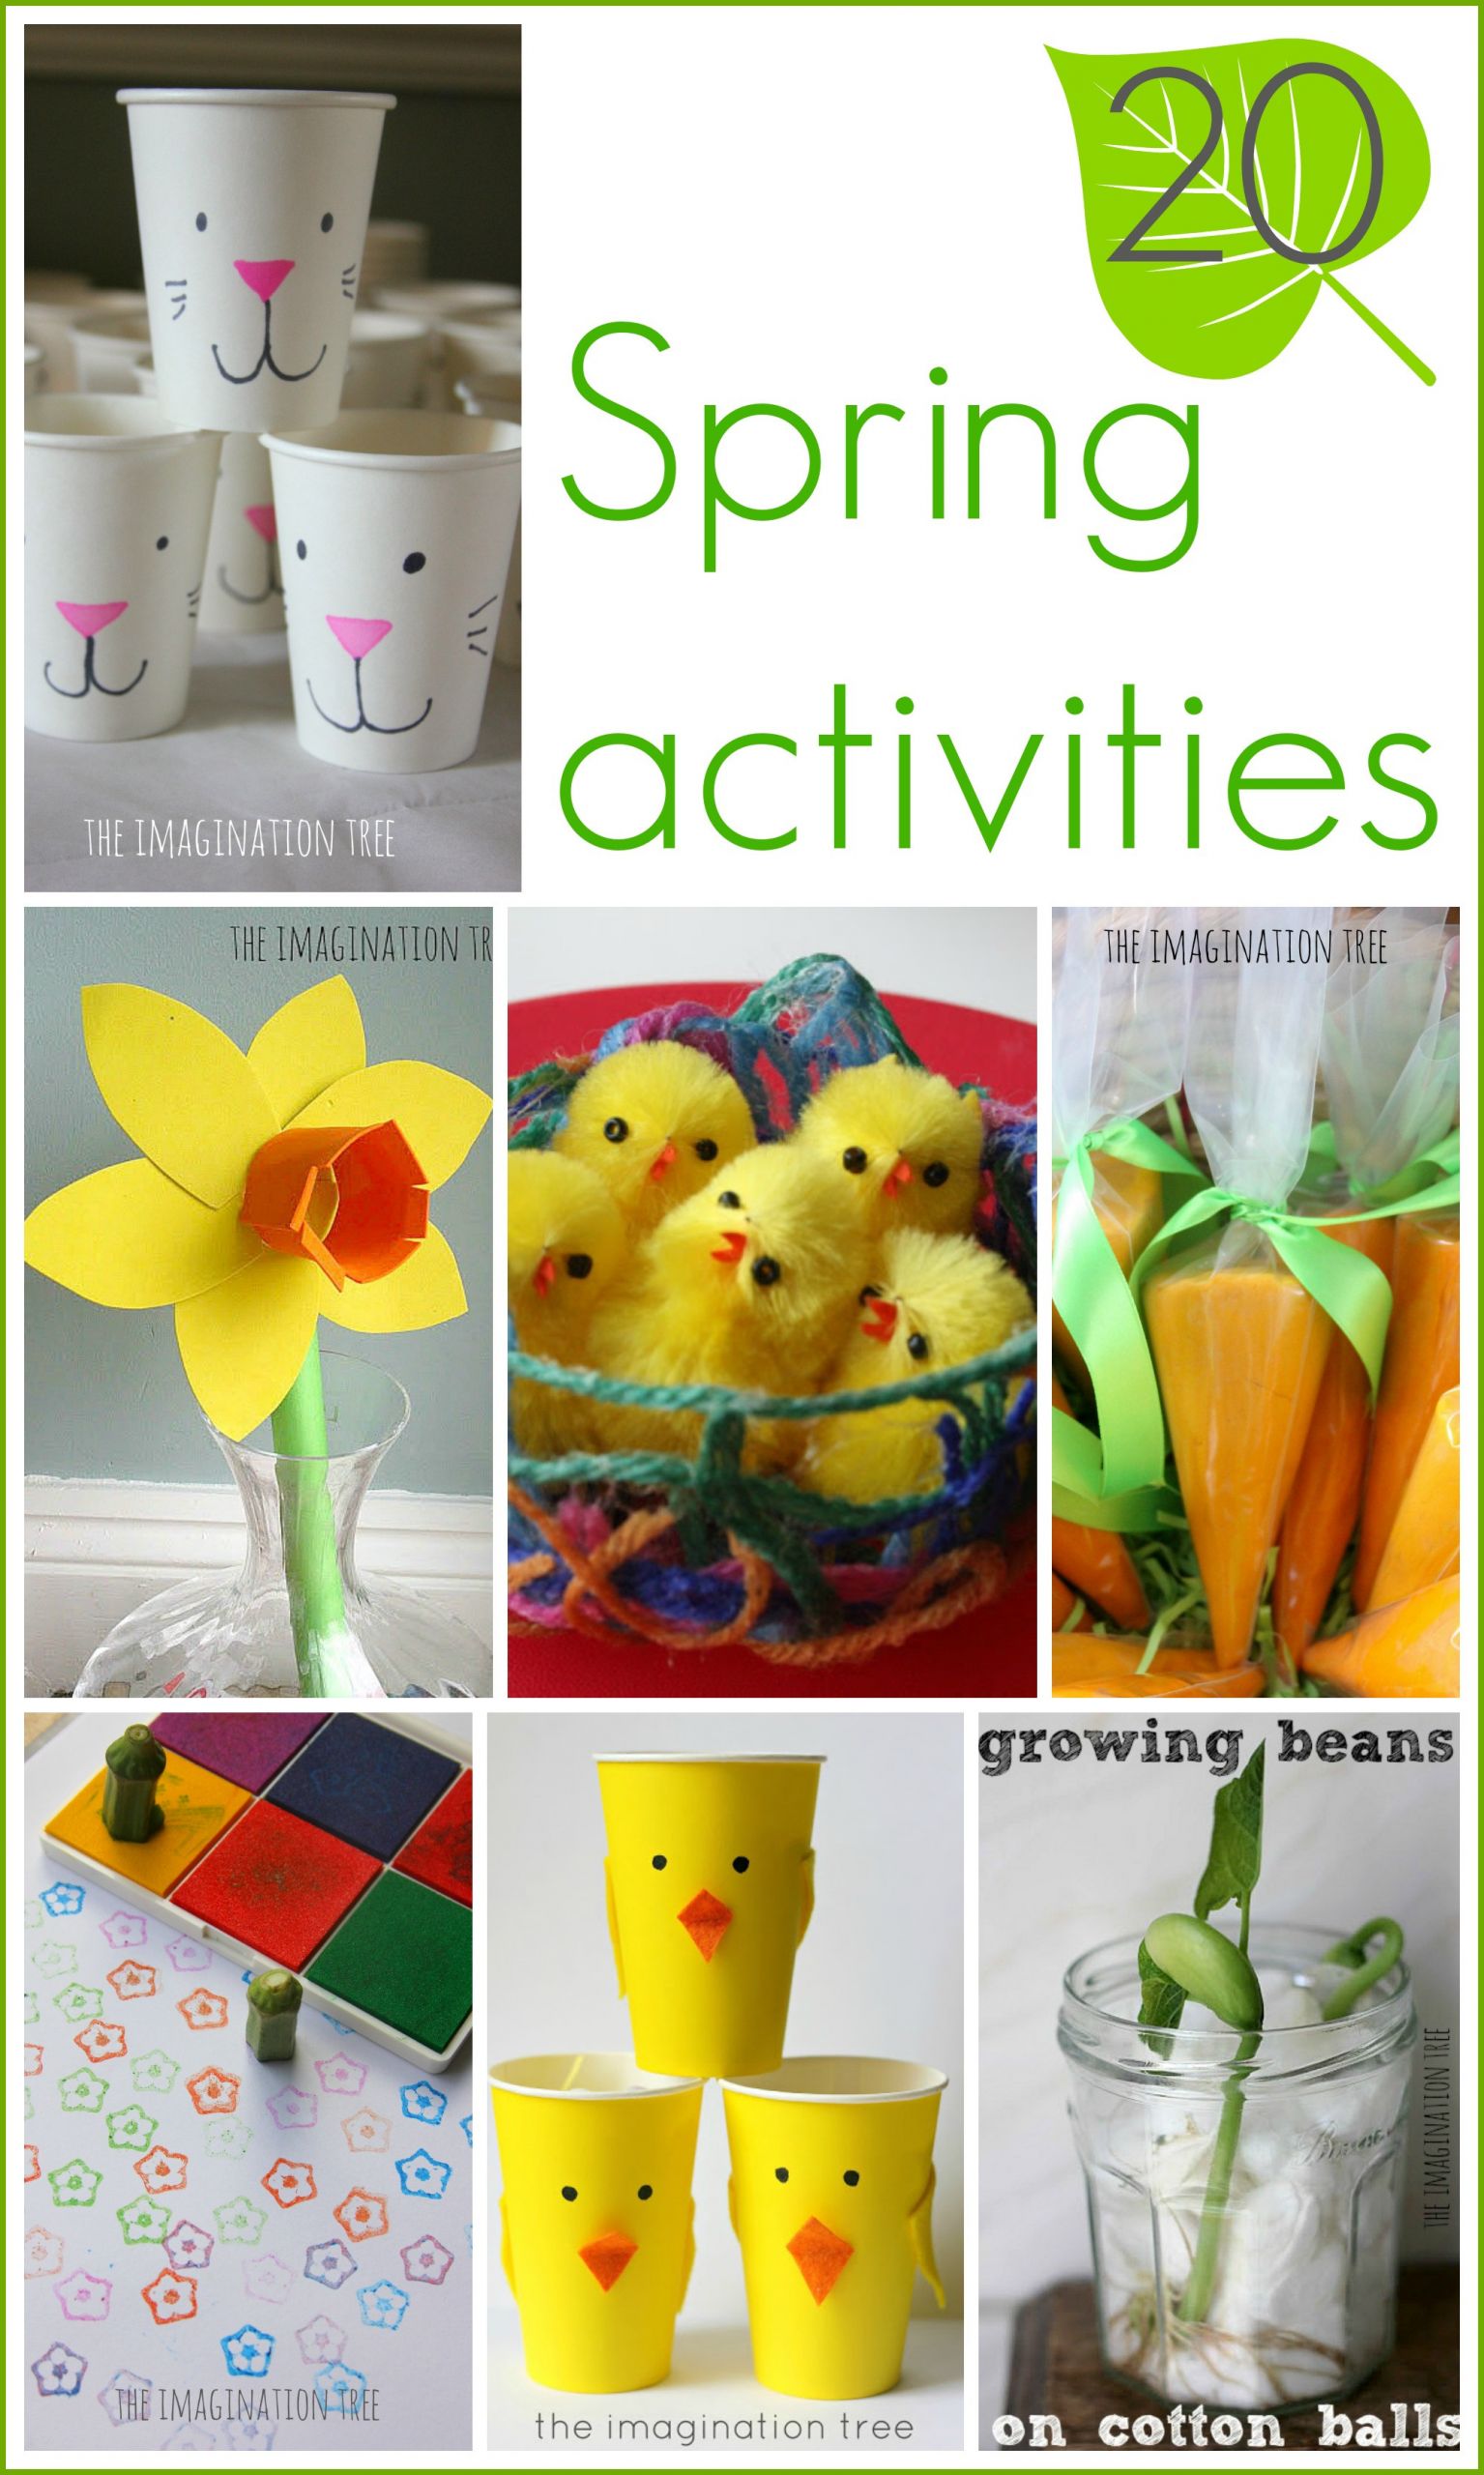 Spring Ideas For Children
 15 Spring Activities for Kids The Imagination Tree